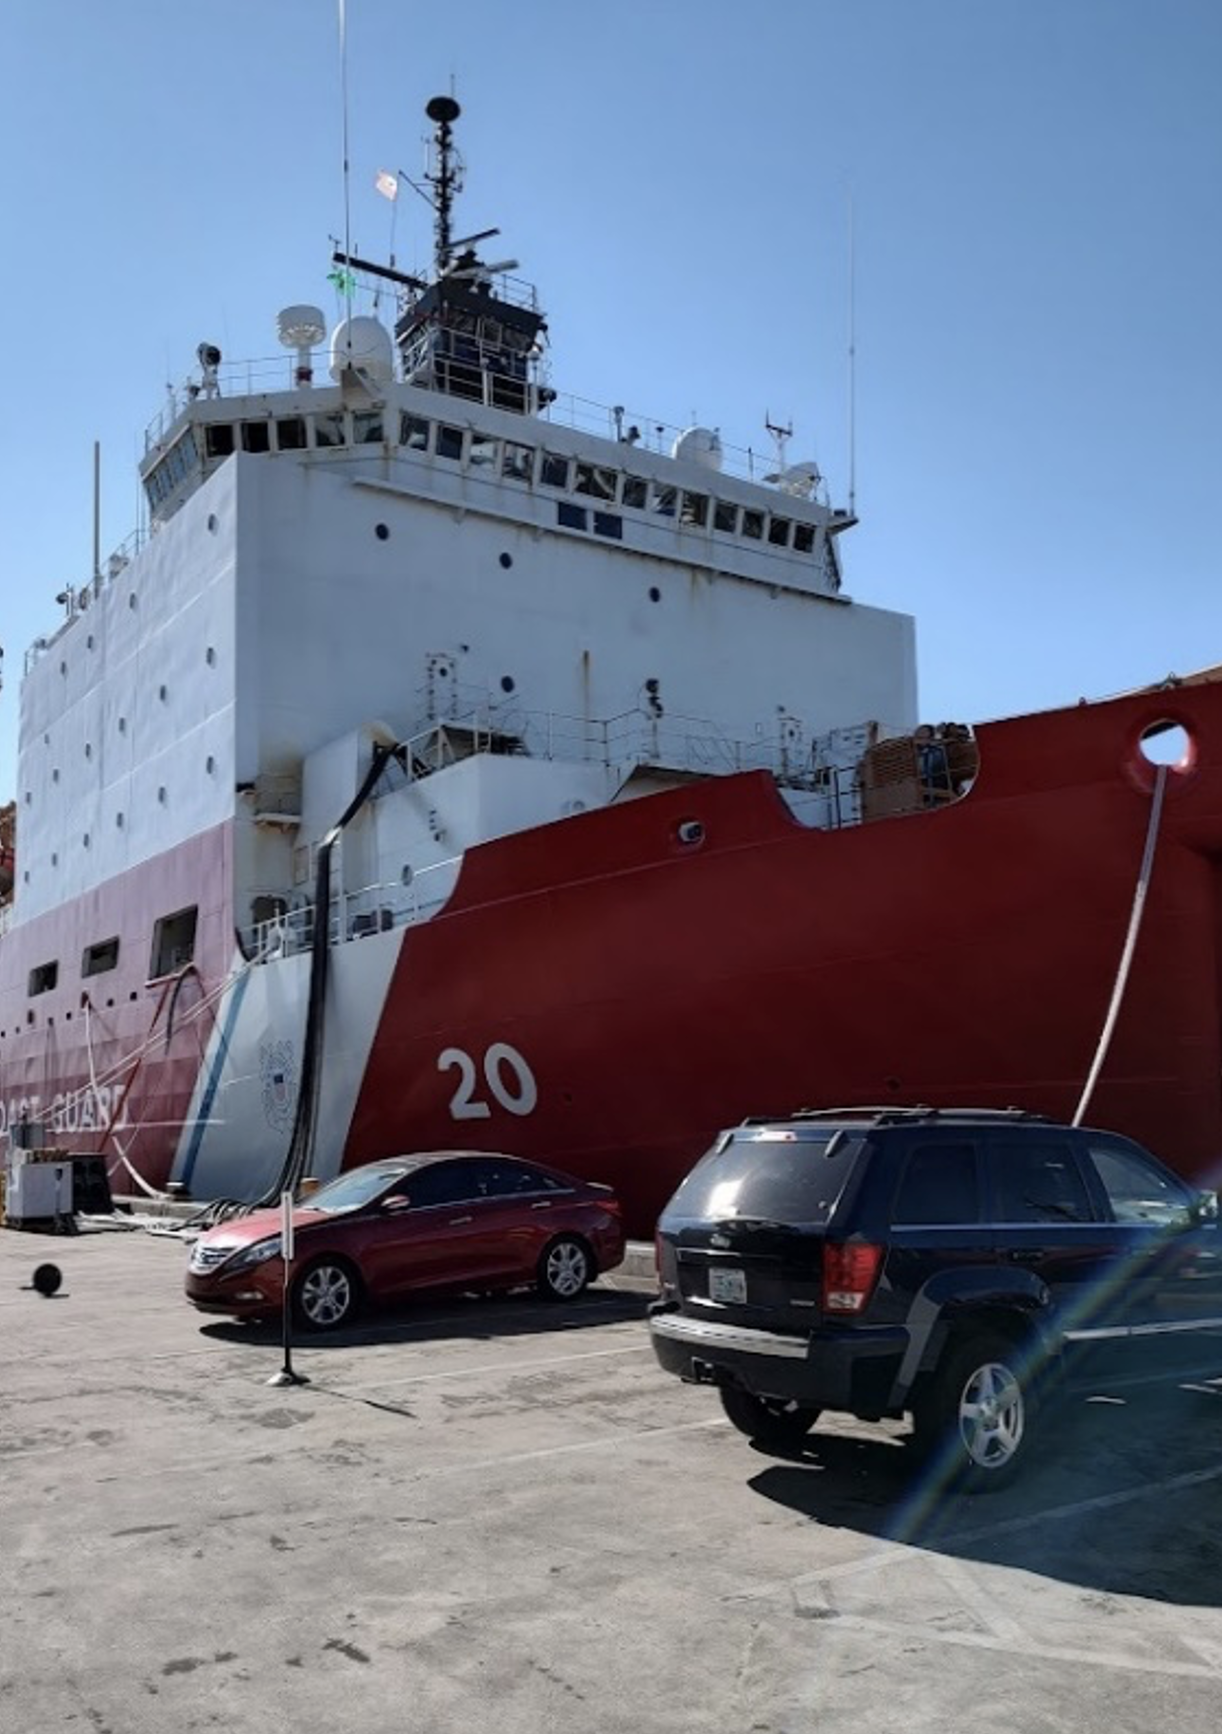 A photo of the Healy icebreaker docked in Seattle